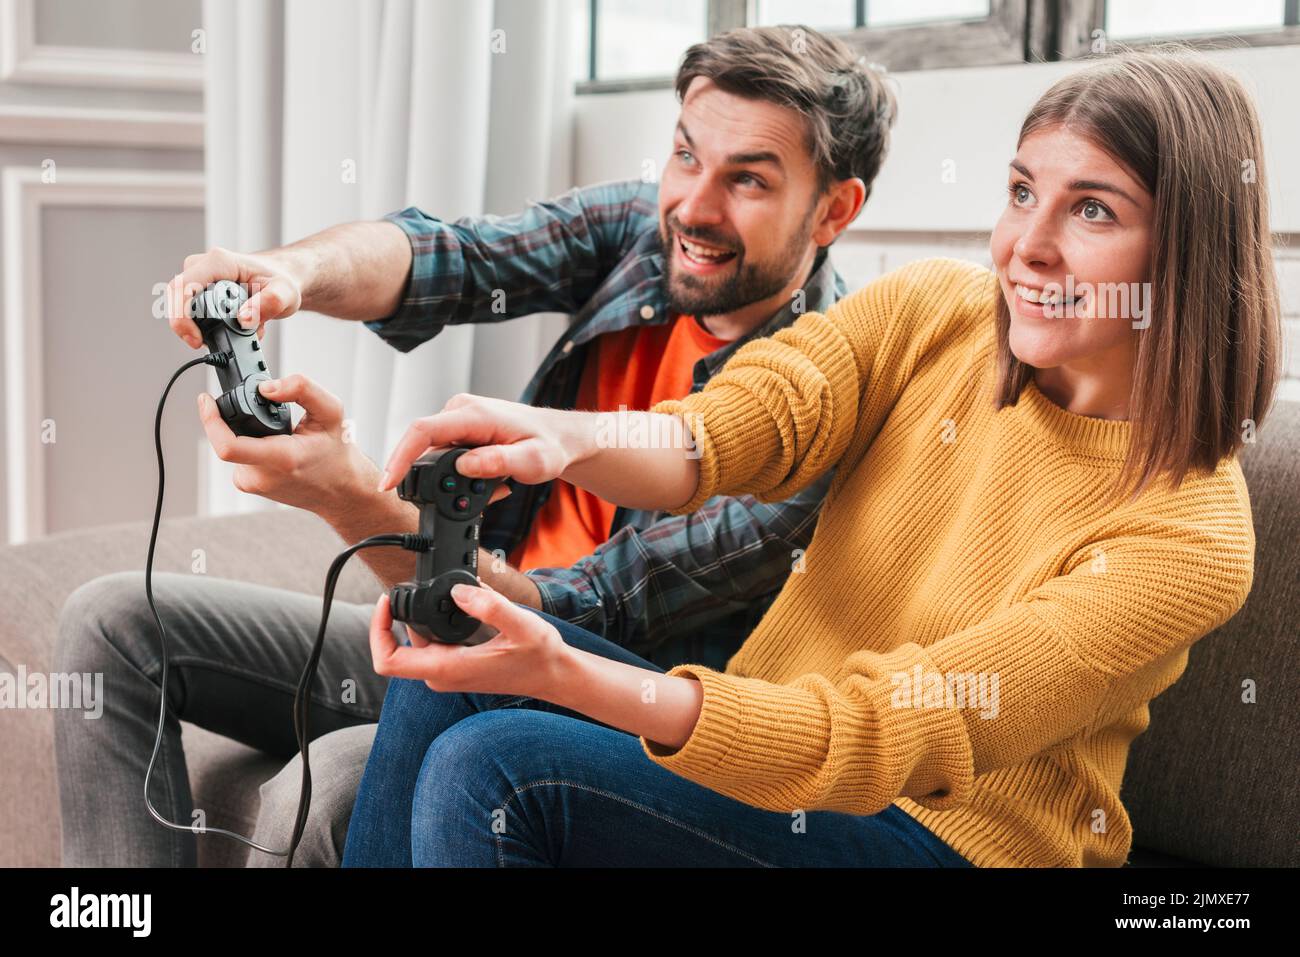 Beautiful couple playing video games console Stock Photo